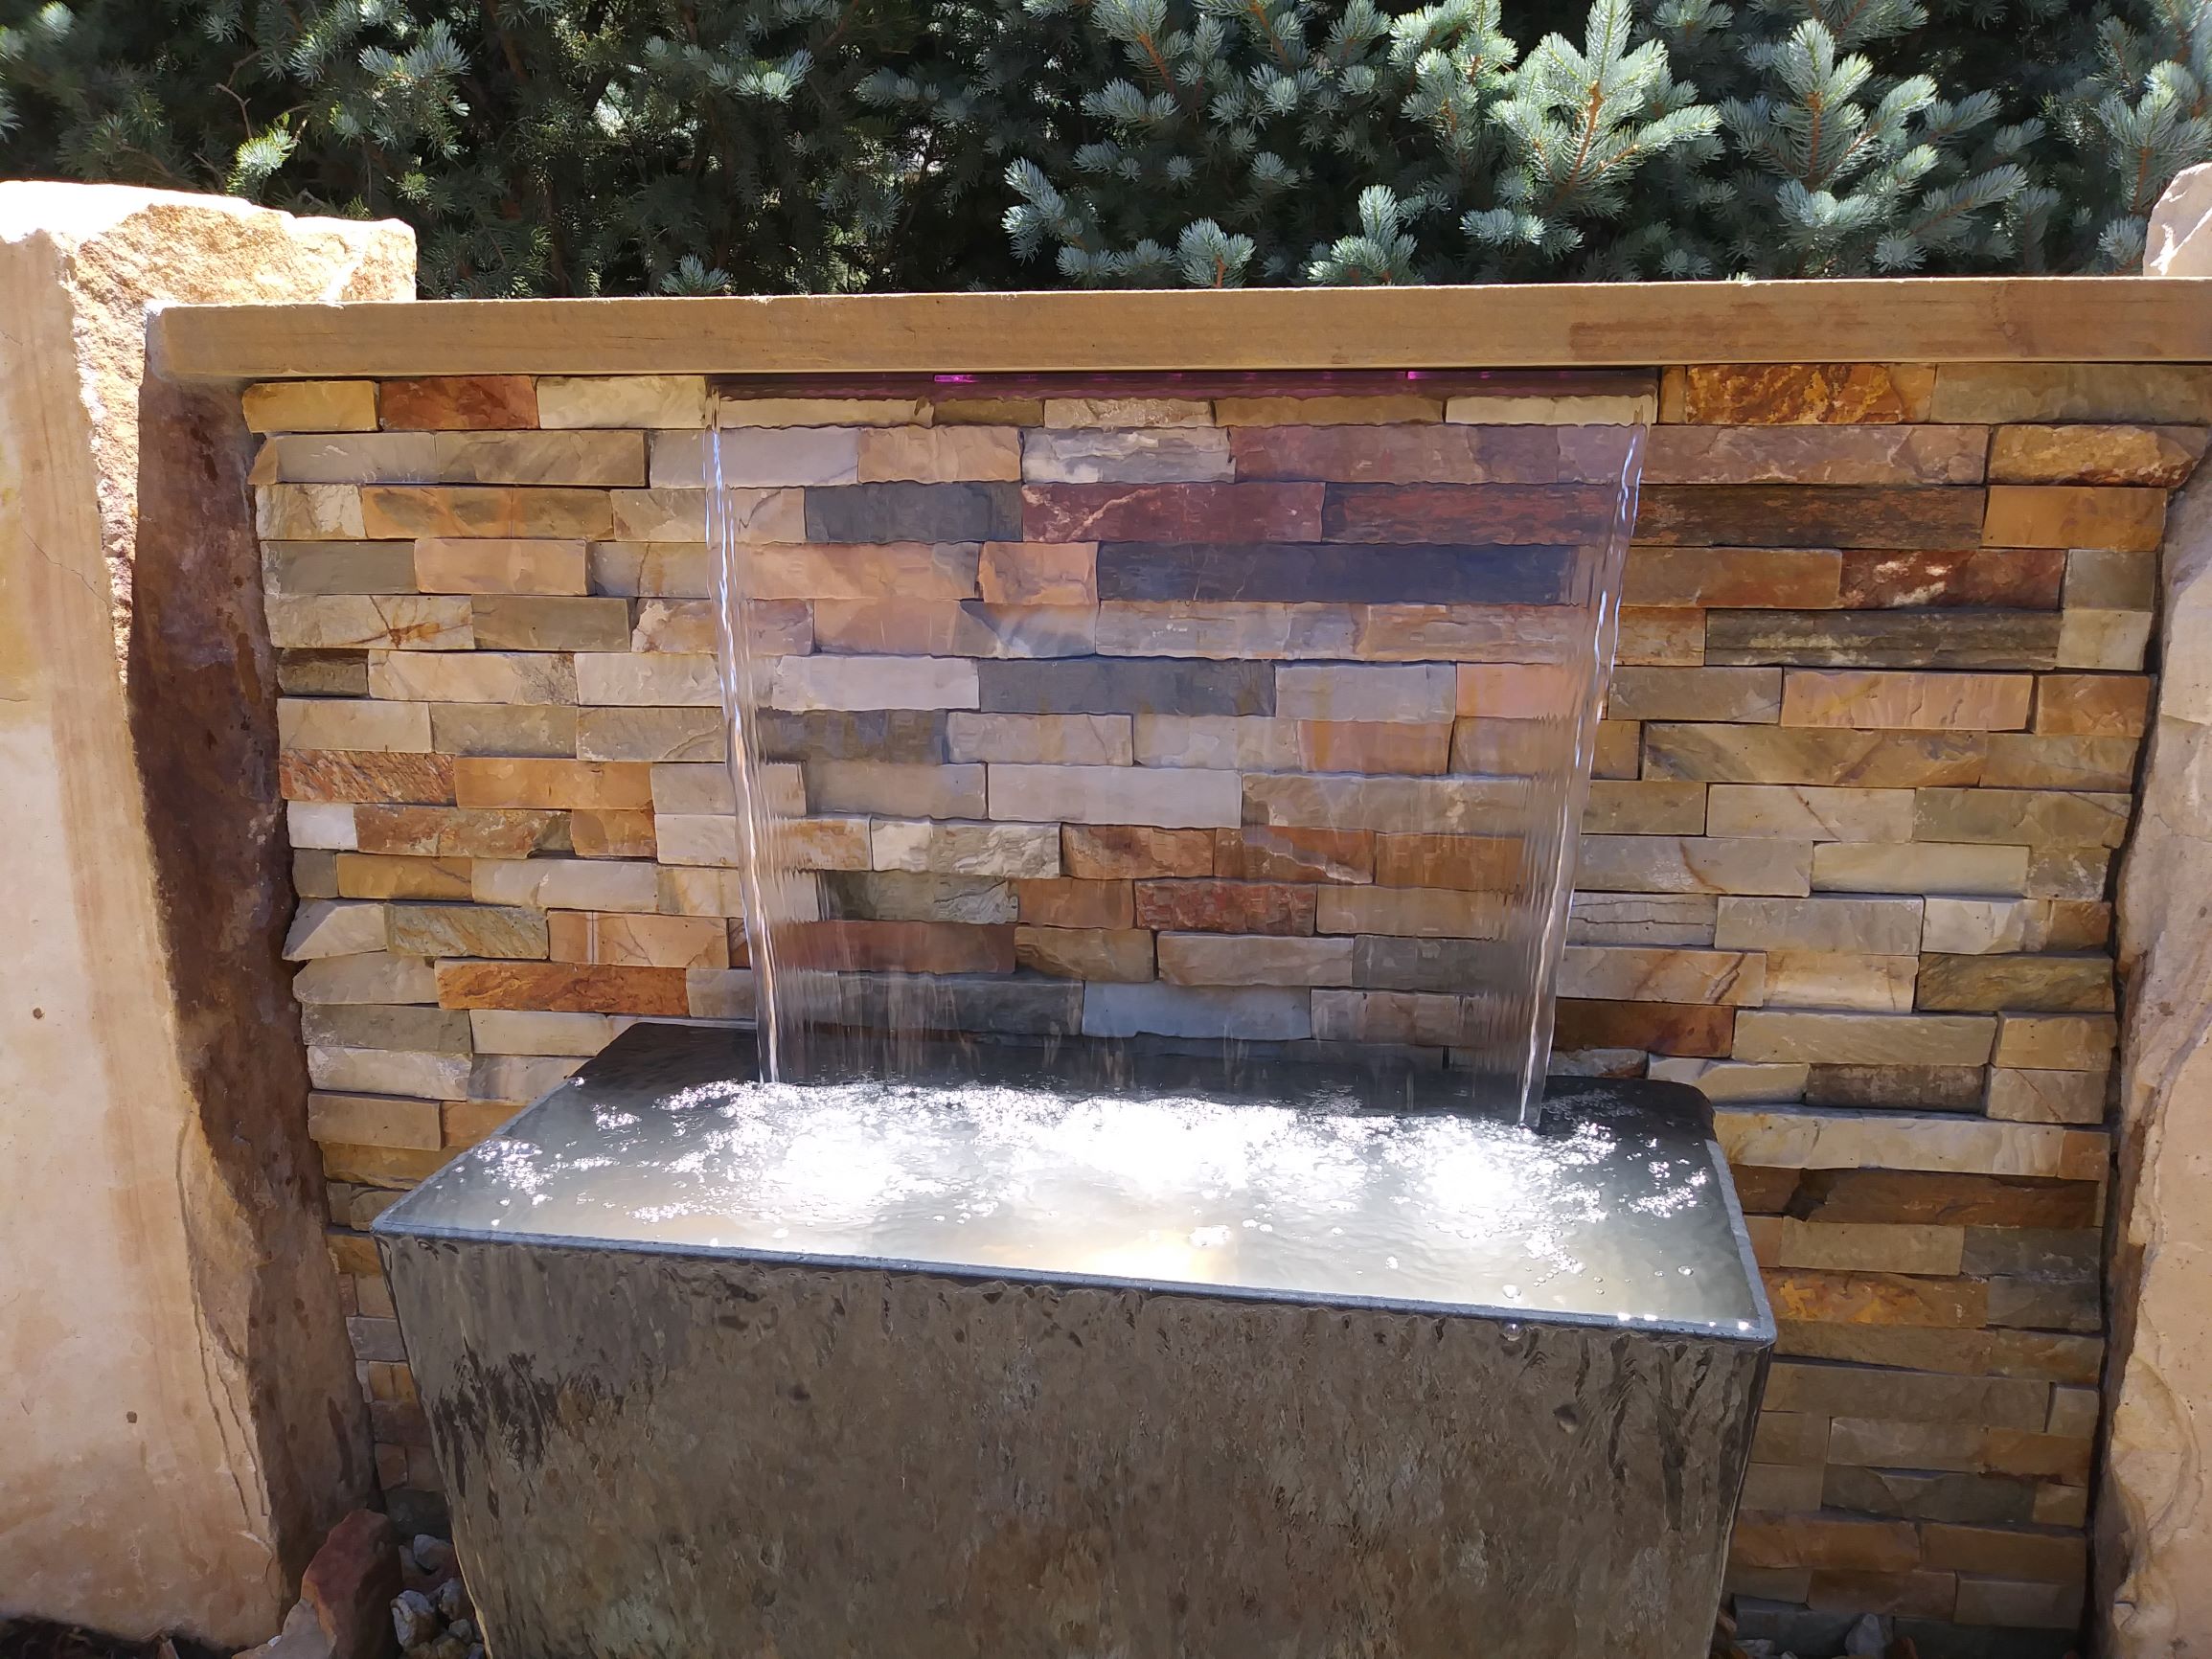 Small water feature set in stone.